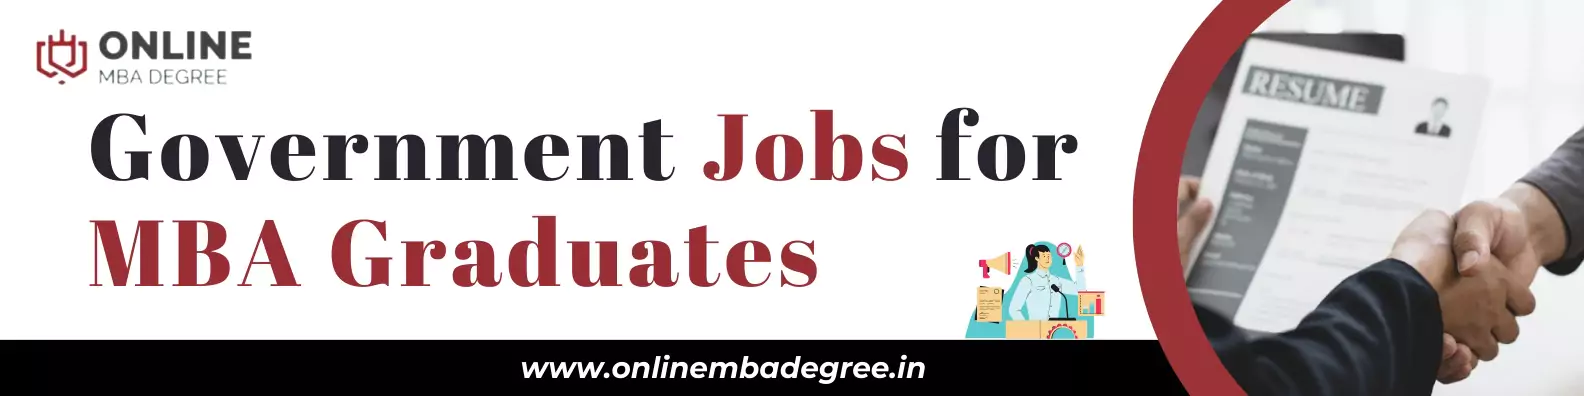 Online MBA Degree for Government JOB